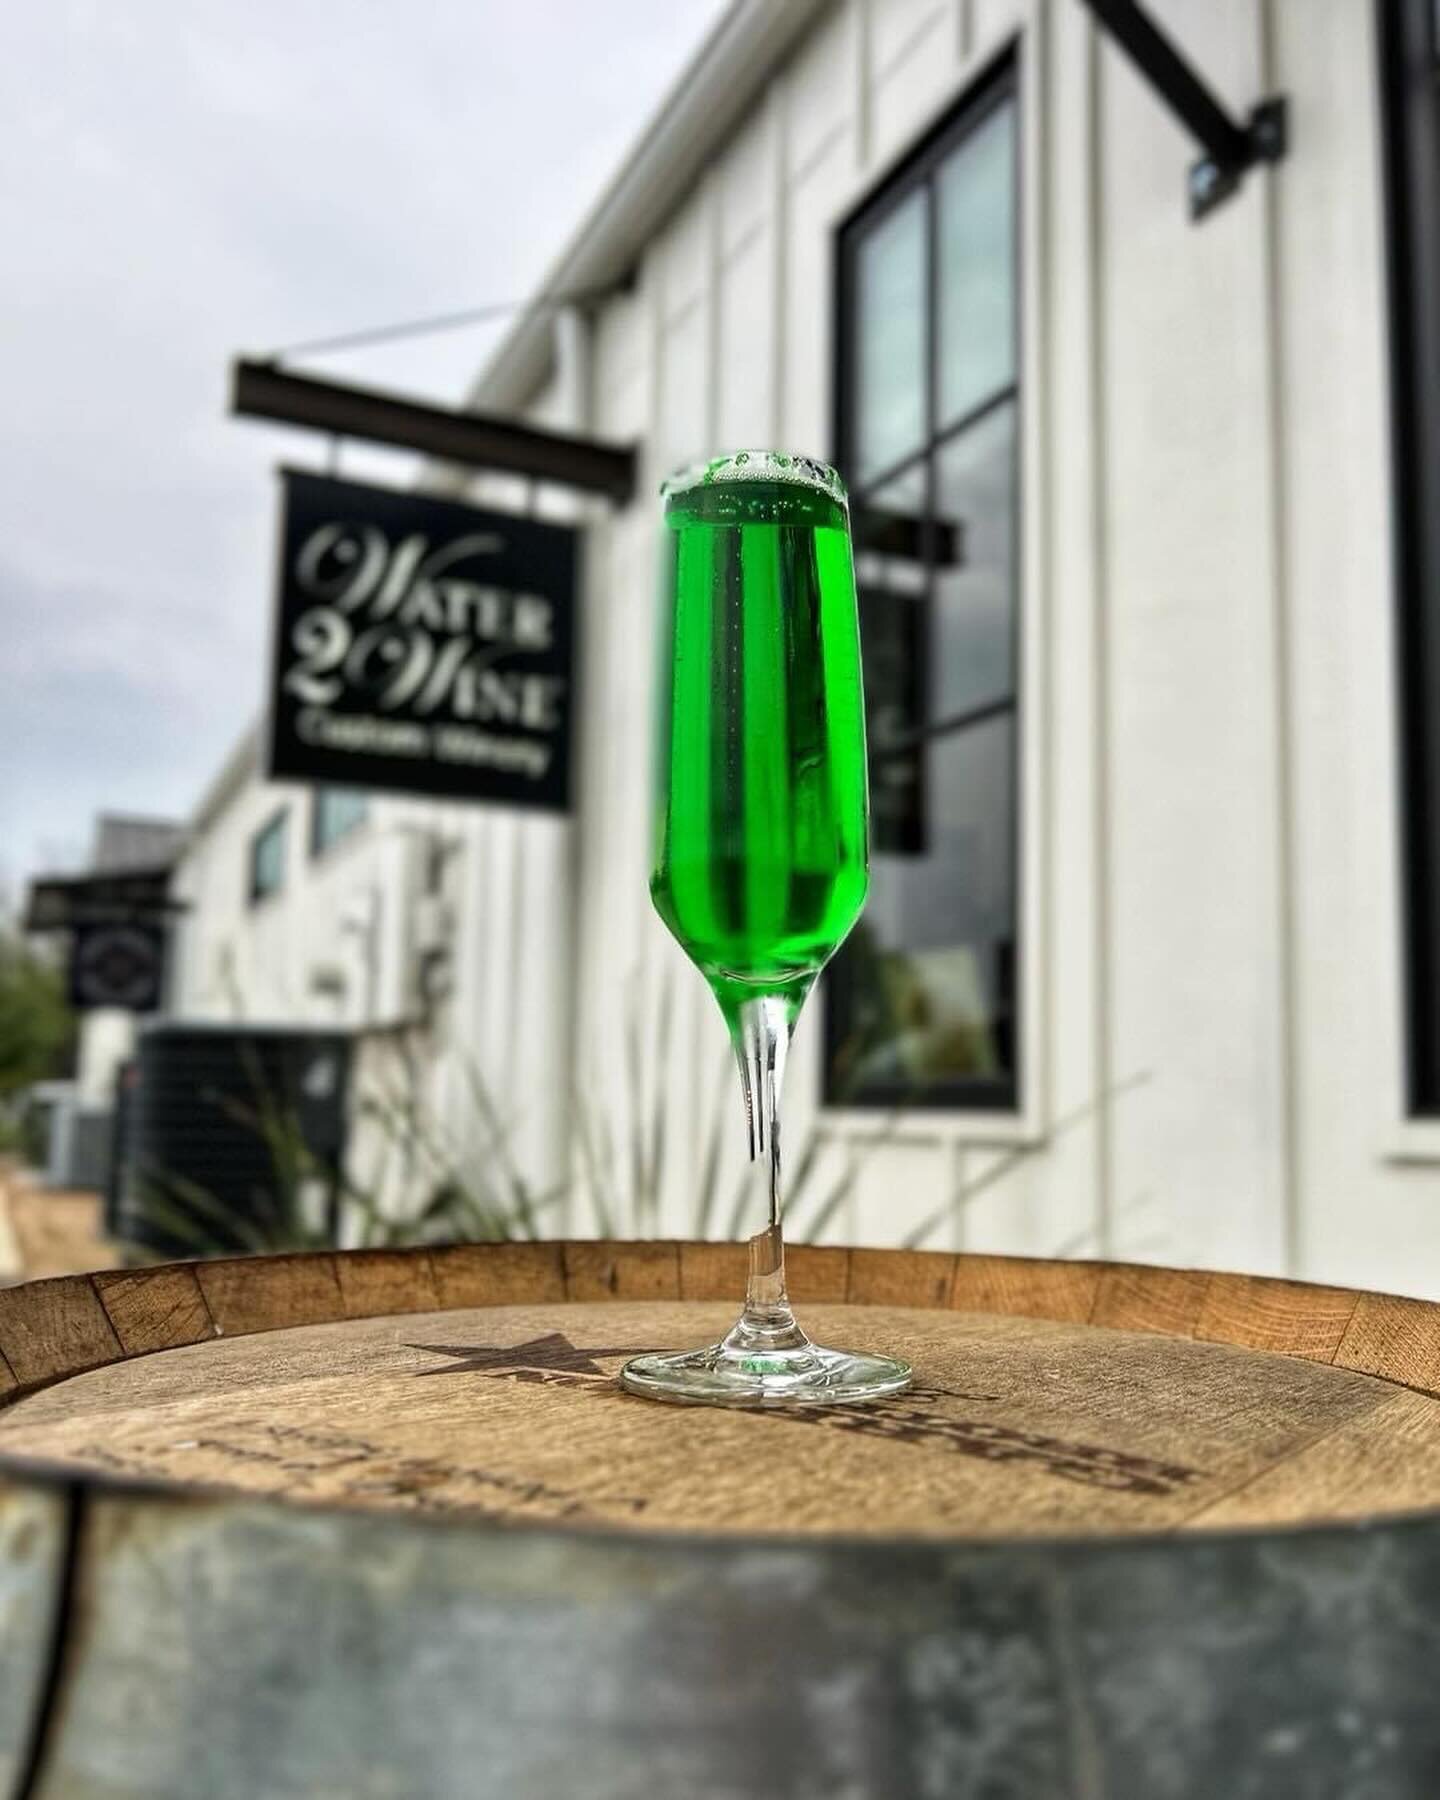 Happy St. Patrick&rsquo;s Day Buda! Remember to wear green today and hang out around town!

Here are all the fun specials you can find around town for St. Patrick&rsquo;s Day: @water2winebuda has green wine, gruene apple winemosas and froz&eacute;s a